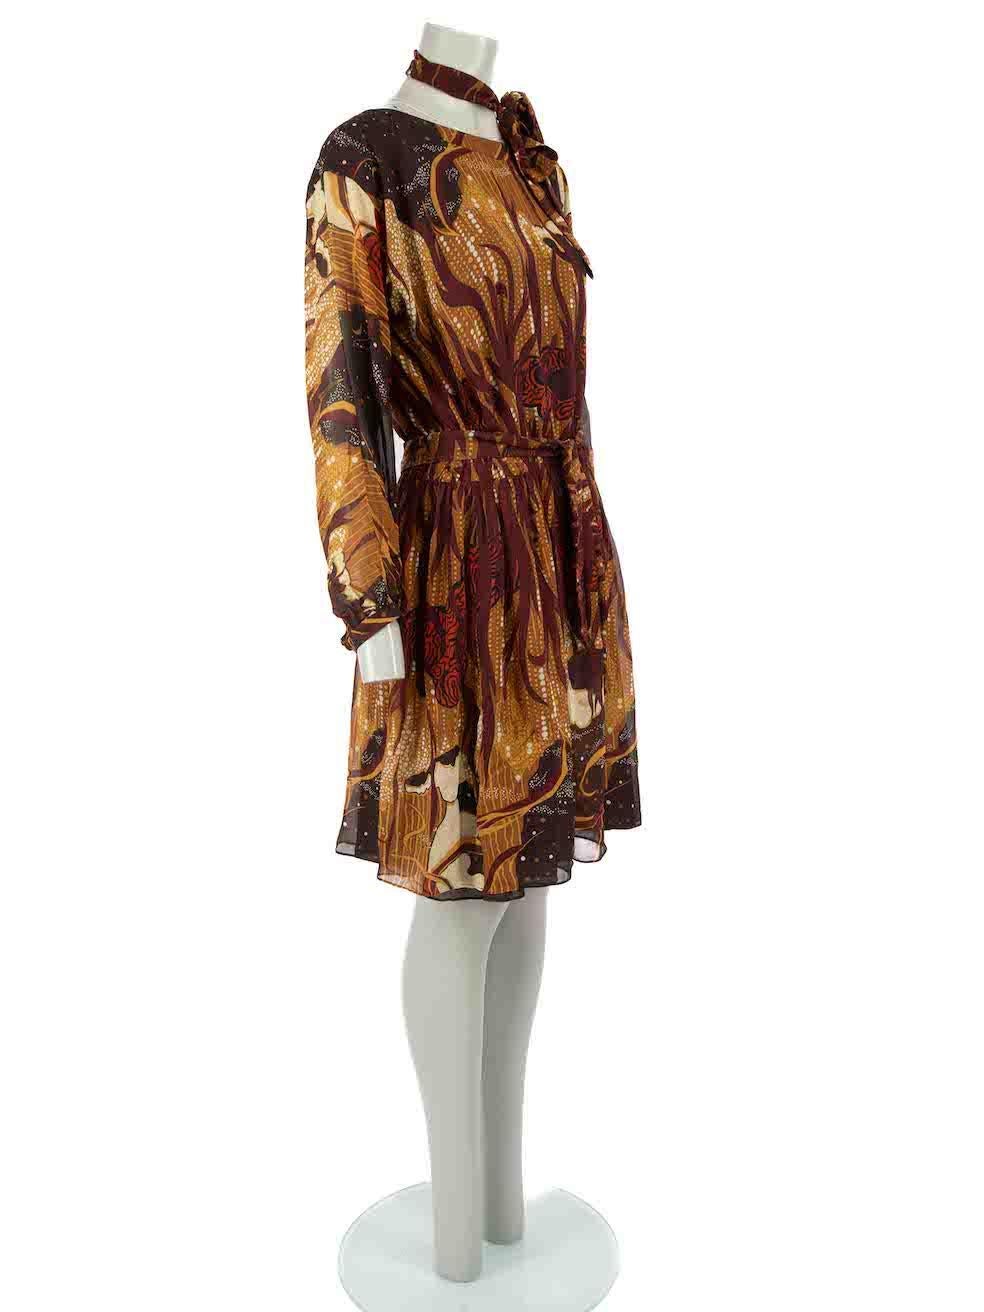 CONDITION is Very good. Minimal wear to dress is evident. Minimal wear to the front and back with light marks to the silk and the button at the right cuff has been replaced on this used Gucci designer resale item.
 
 Details
 Brown
 Silk
 Dress
